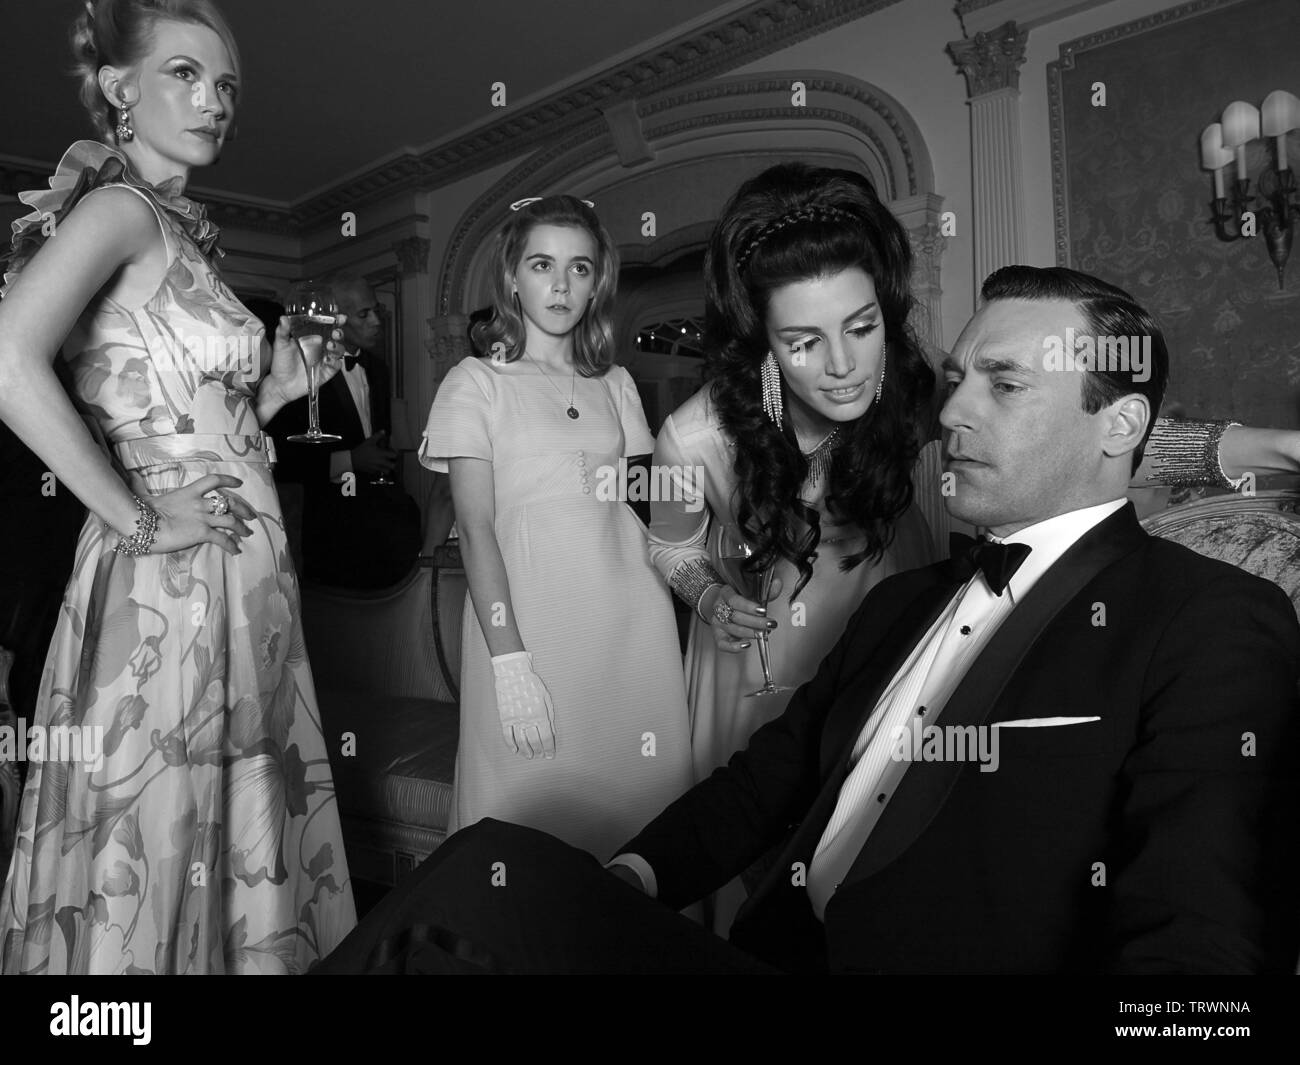 JANUARY JONES , JESSICA PARE , JON HAMM and KIERNAN SHIPKA in MAD MEN (2007). Copyright: Editorial use only. No merchandising or book covers. This is a publicly distributed handout. Access rights only, no license of copyright provided. Only to be reproduced in conjunction with promotion of this film. Credit: AMERICAN MOVIE CLASSICS (AMC)/RADICAL MEDIA / Album Stock Photo